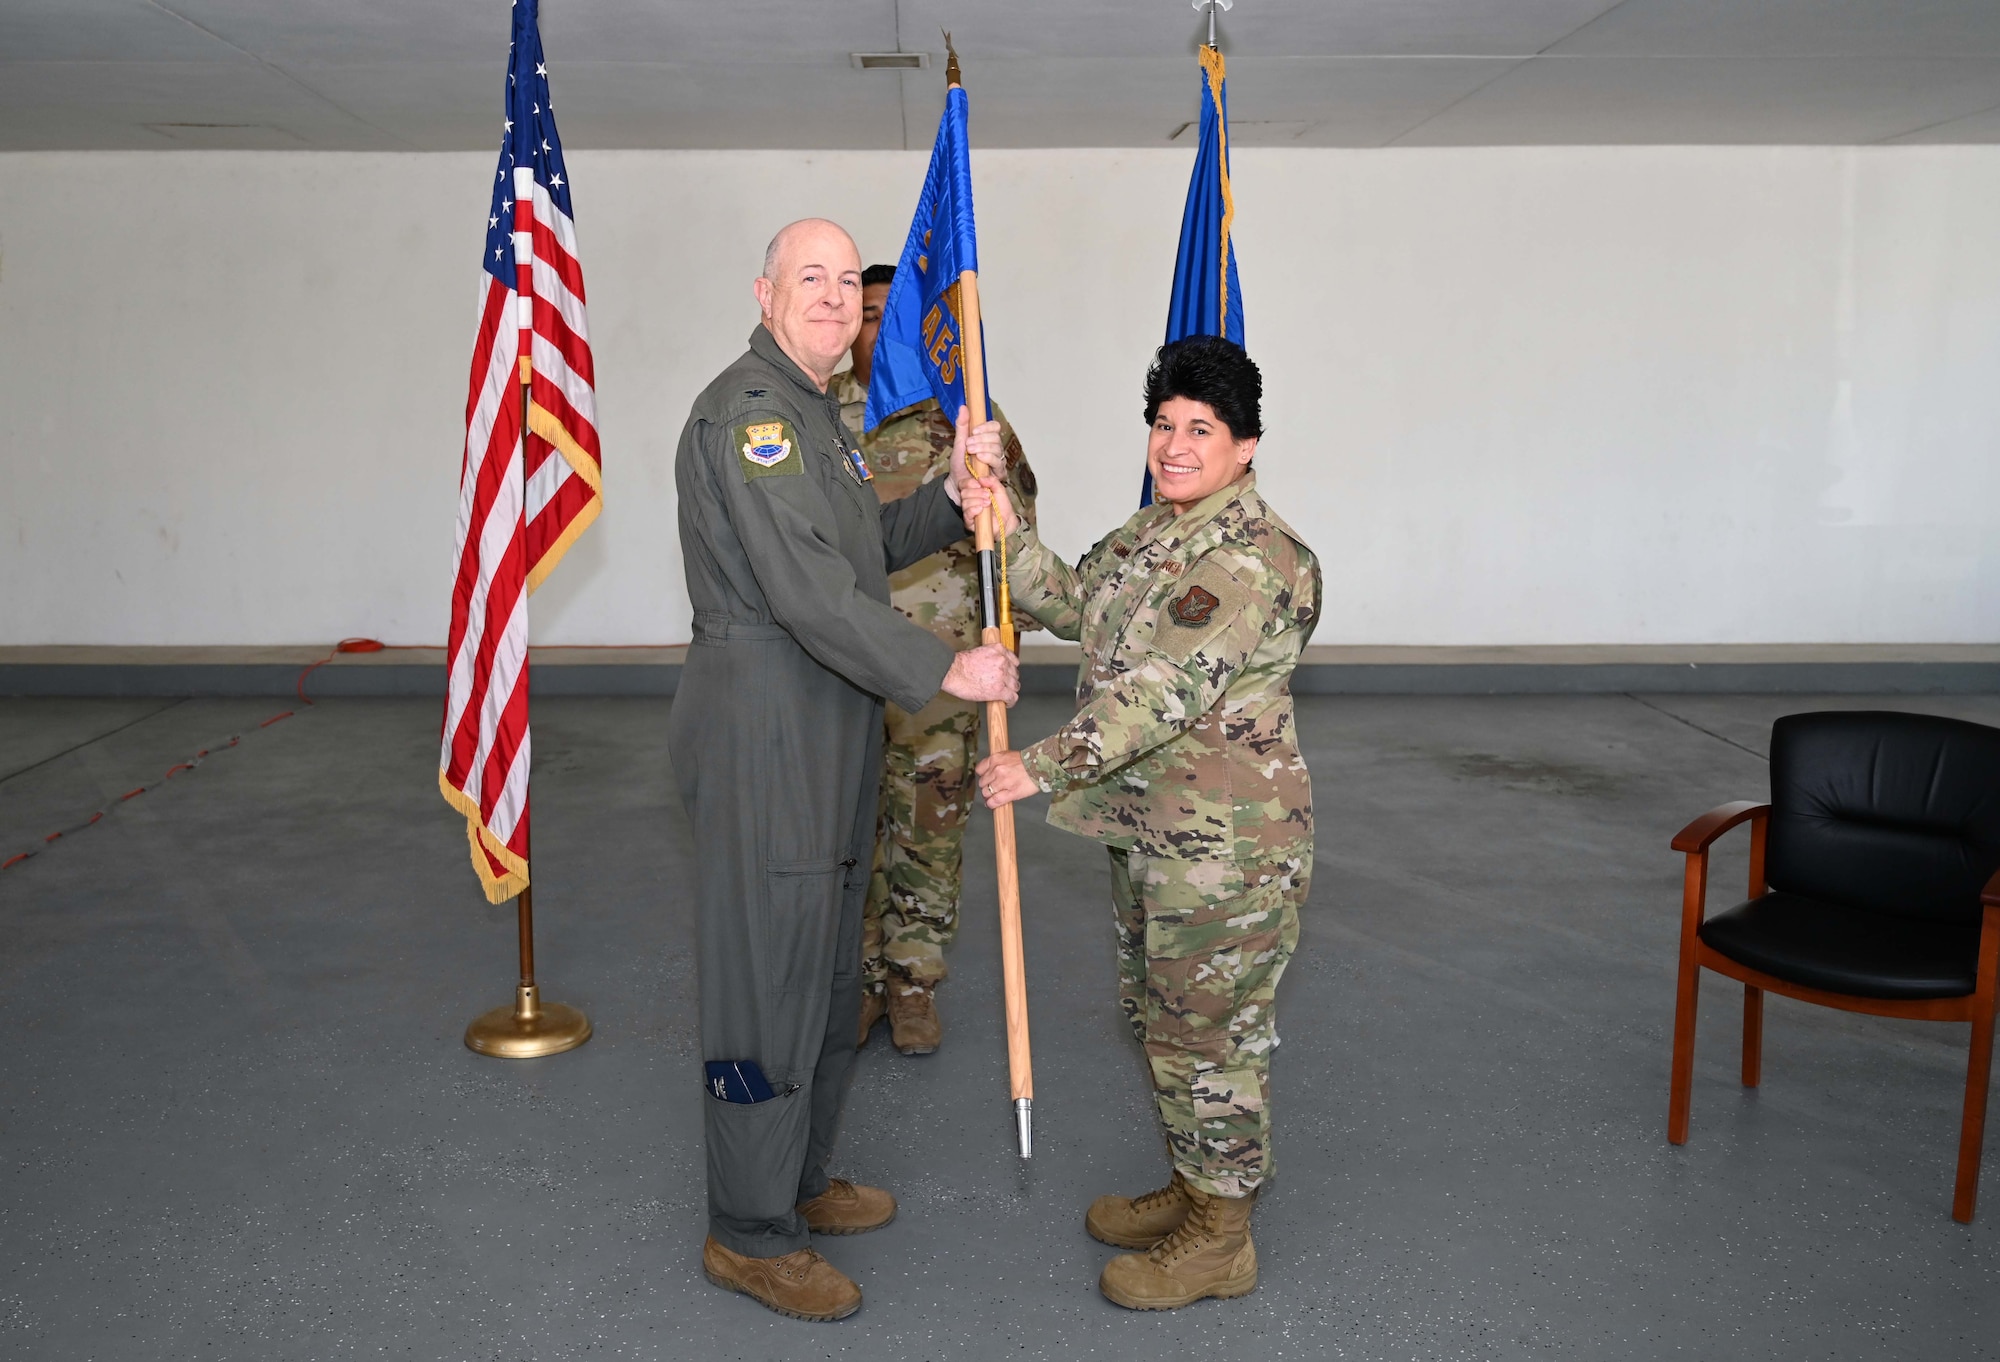 Col. James Miller, 433rd Operations Group commander, presents the 433rd Aeromedical Evacuation Squadron guidon to Col. Sylvia Fernandez during an assumption of command ceremony at Joint Base San Antonio-Lackland, Texas, Nov. 5, 2022. The 433rd AES provides aeromedical evacuation support when events like natural disasters and conflict occur, or anytime routine medical transportation by air is required. (U.S. Air Force photo by Tech. Sgt. Mike Lahrman)